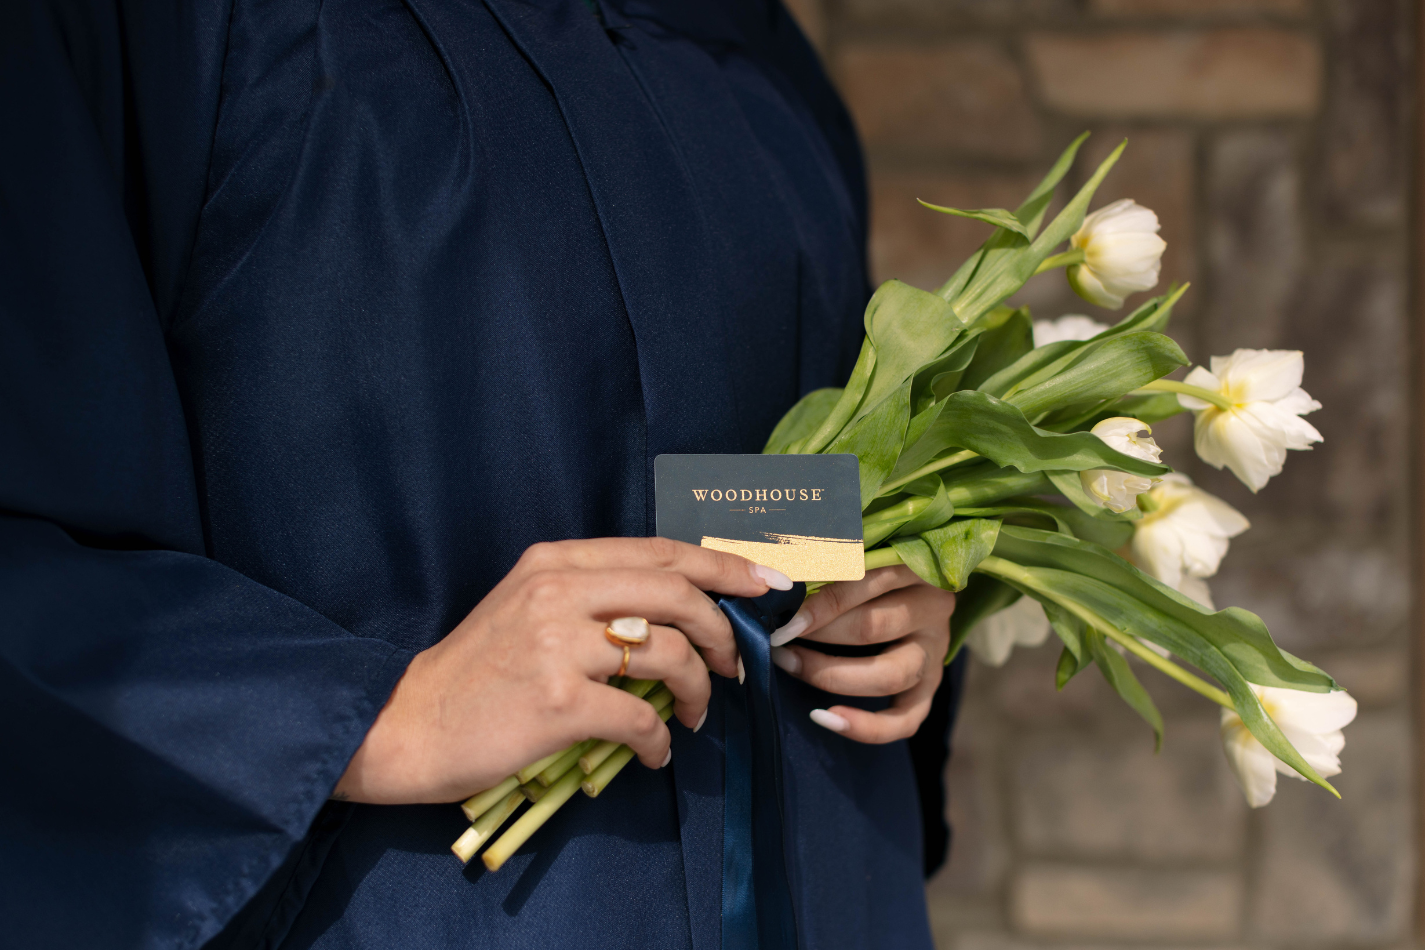 graduate holding a gift card and flowers